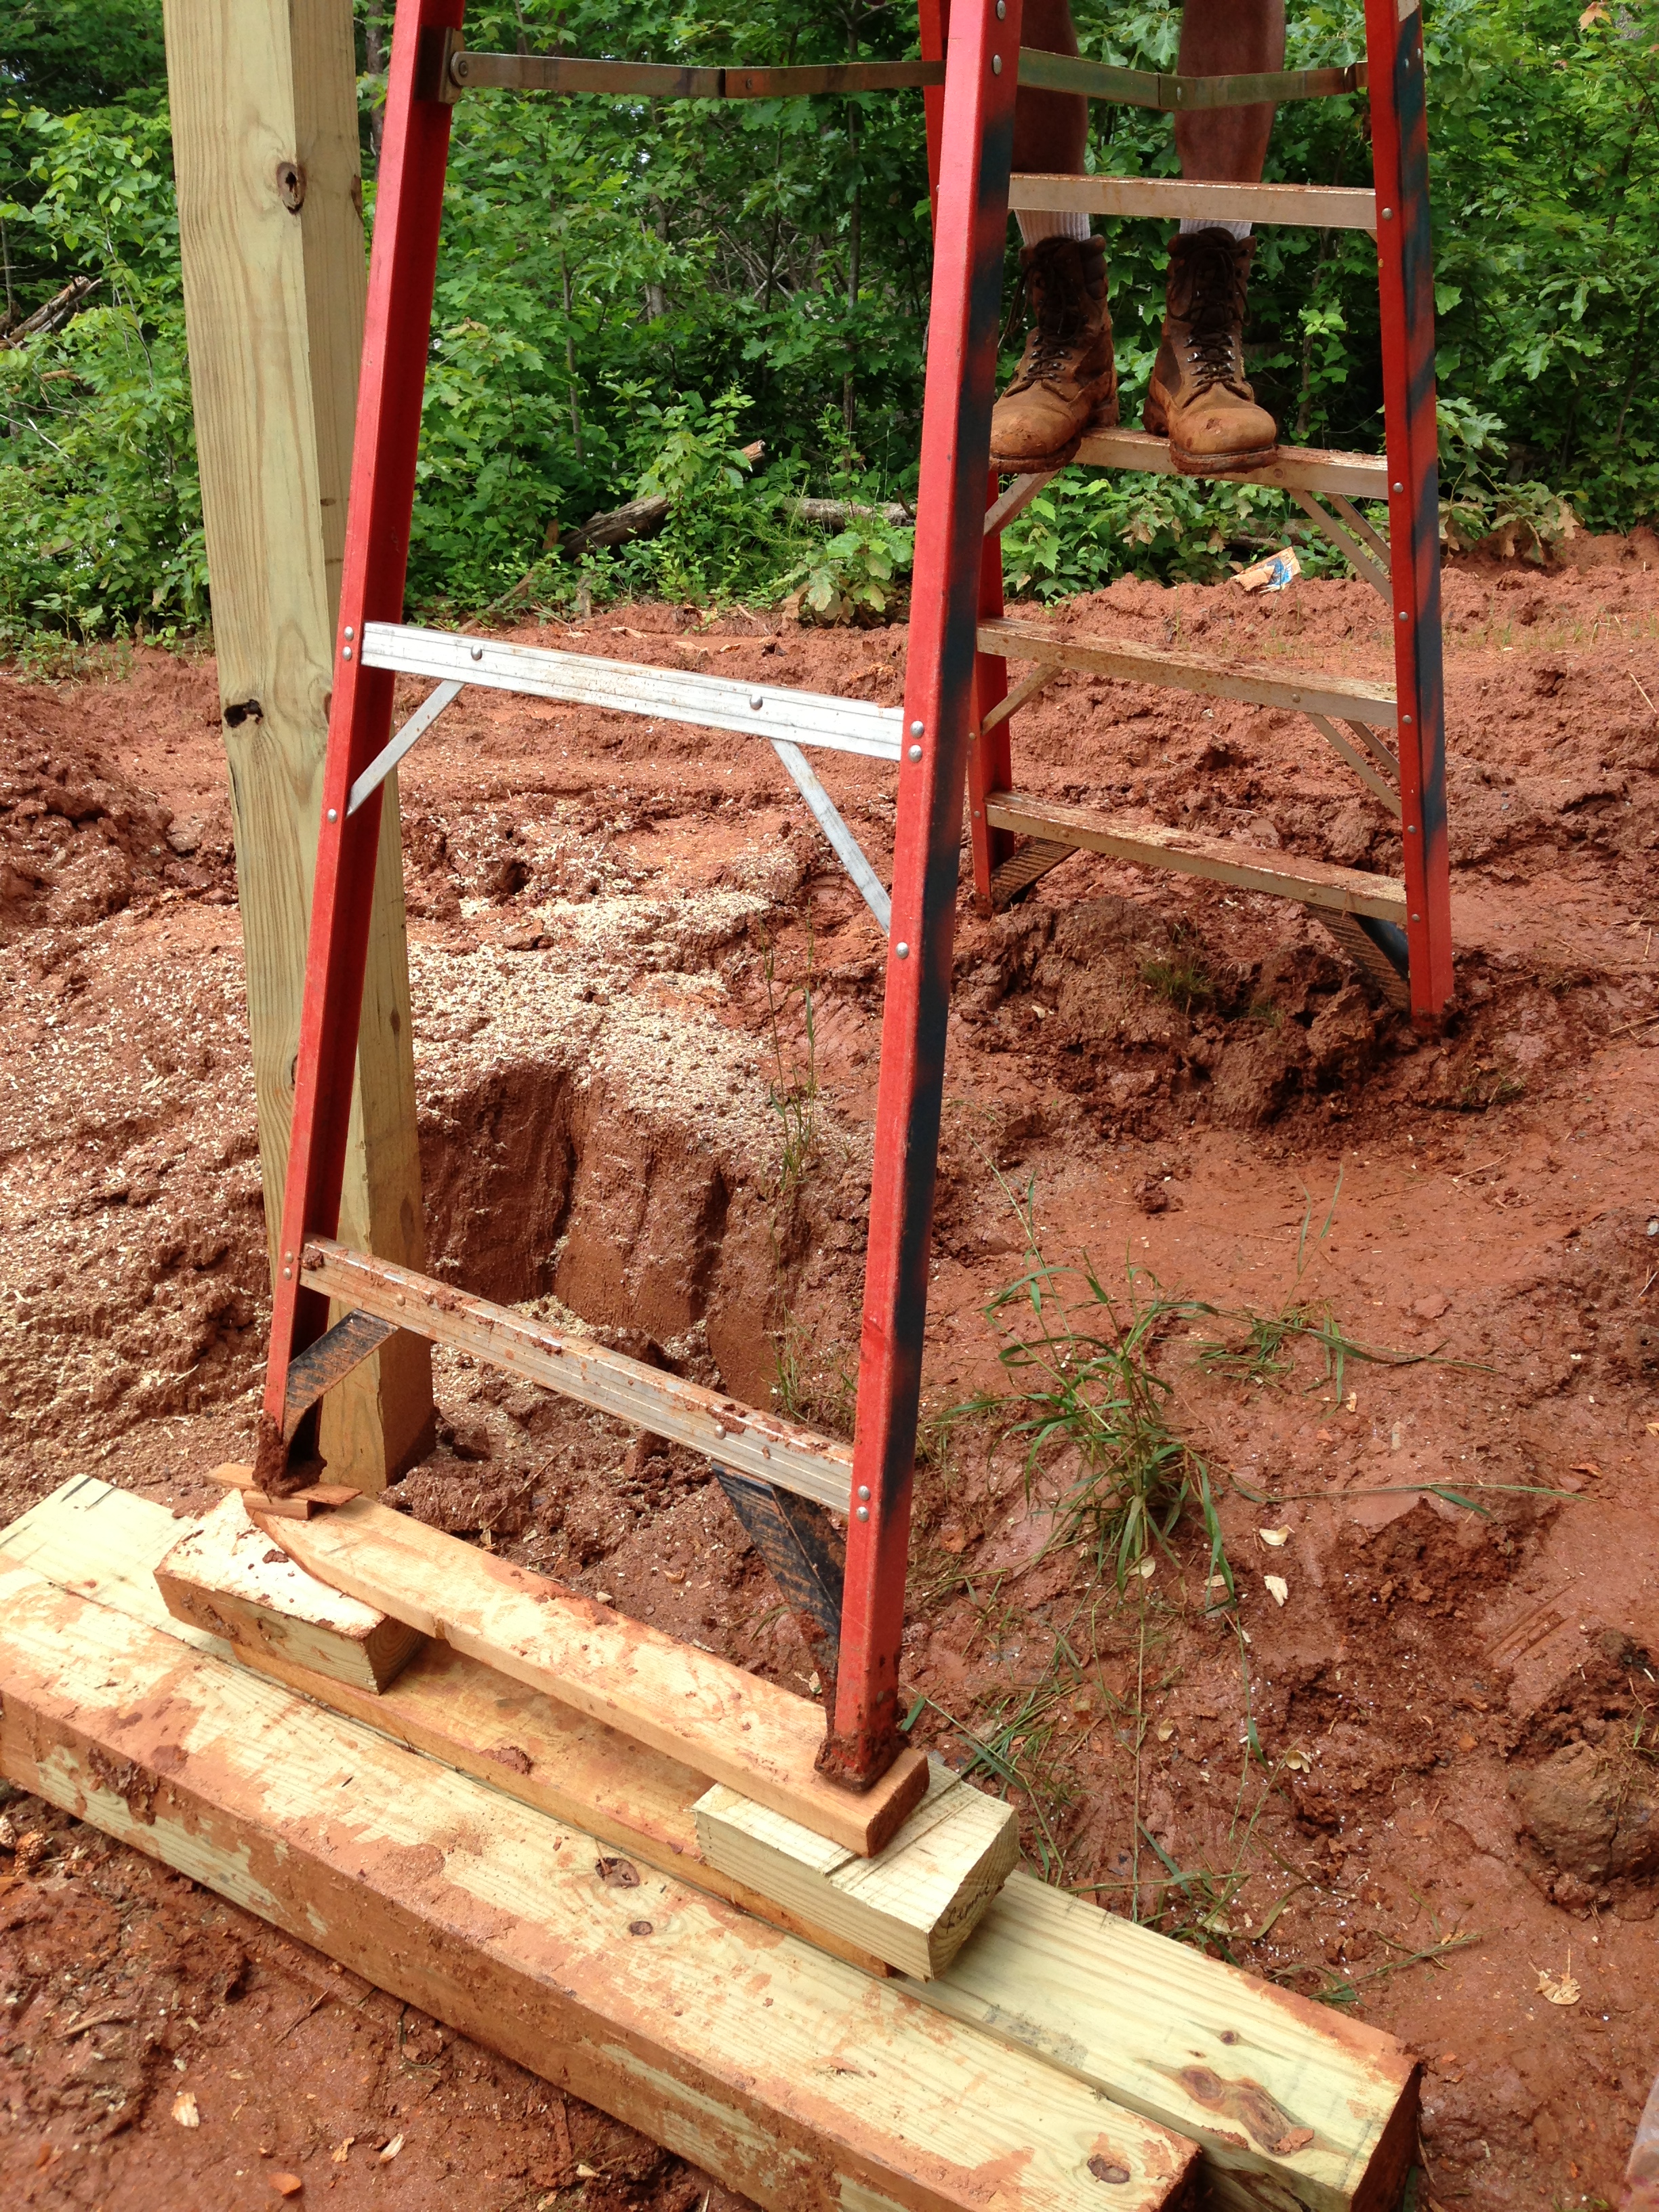 Balancing uneven ground to stabilize the ladder